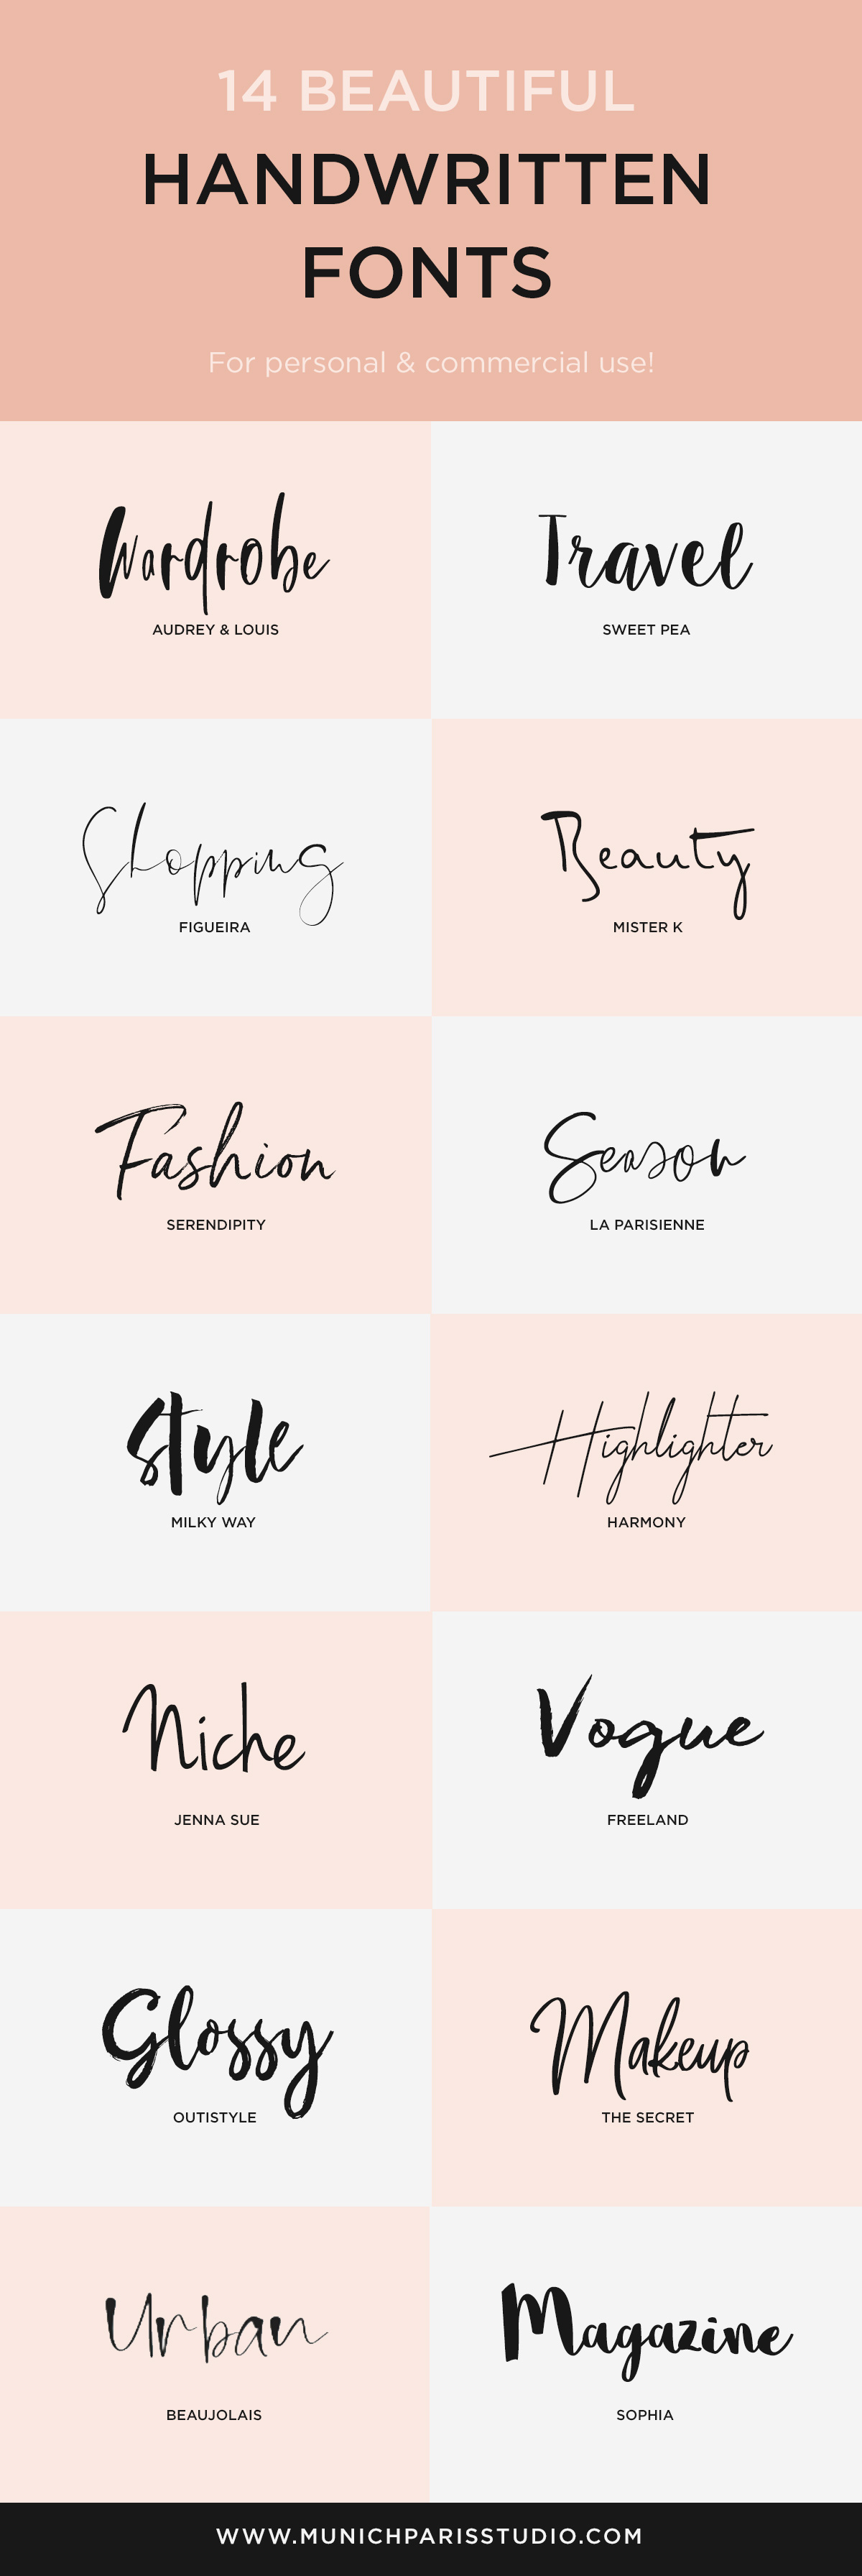 14 beautiful hand-lettered fonts free to download premium fonts to use for quotes, logos, web design, branding and more